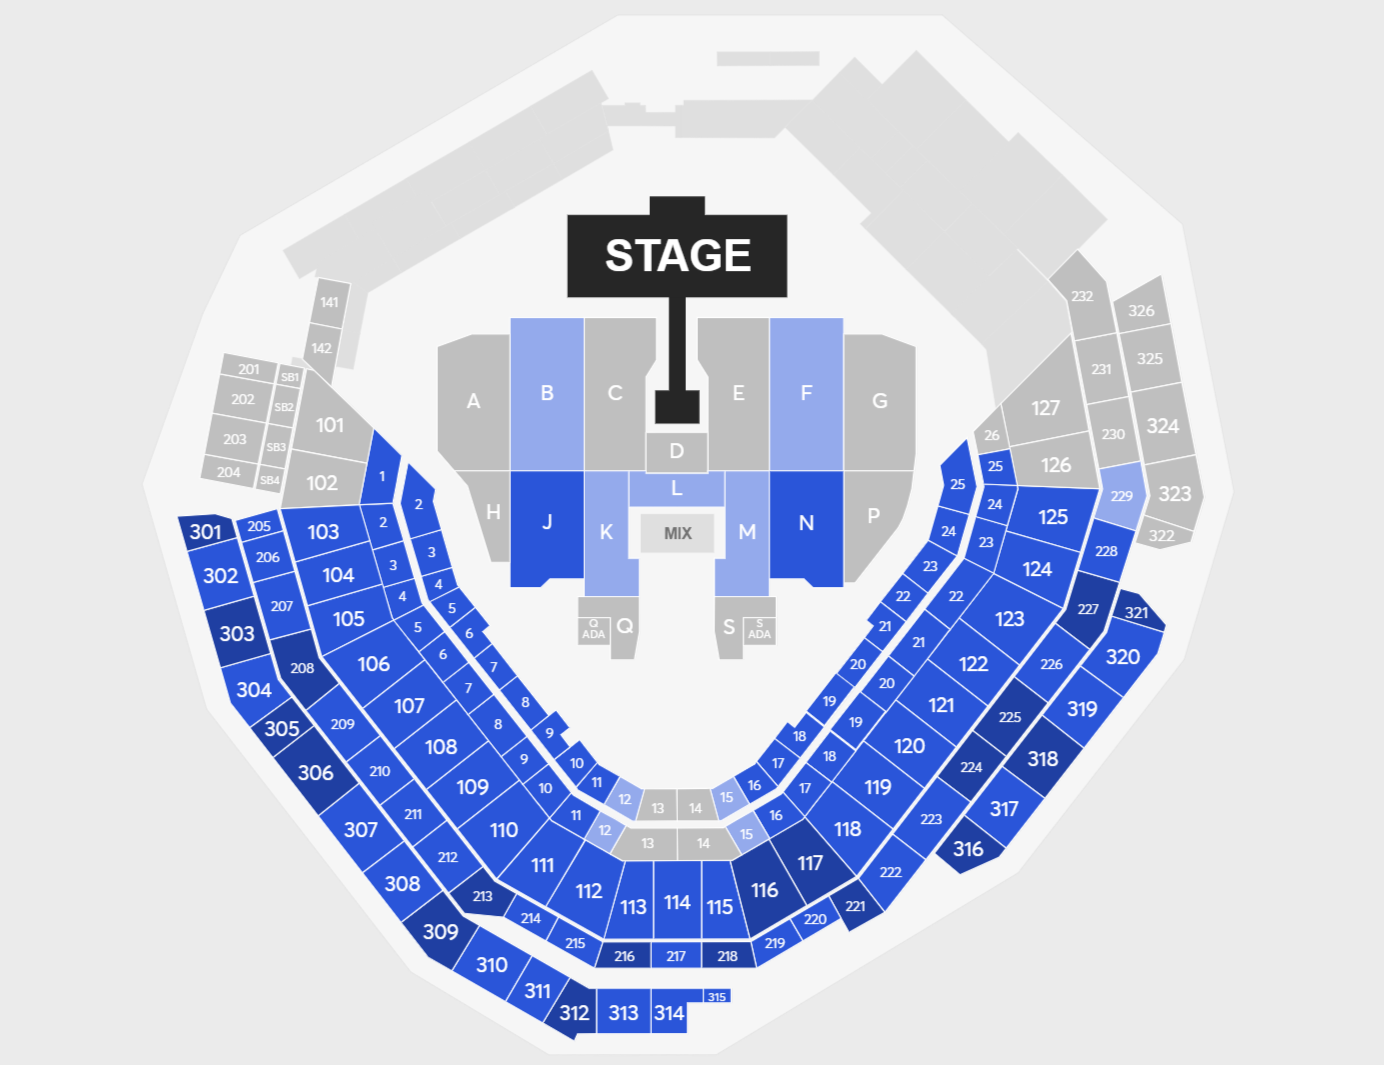 Official Platinum seats are going for over $1,000 on the floor